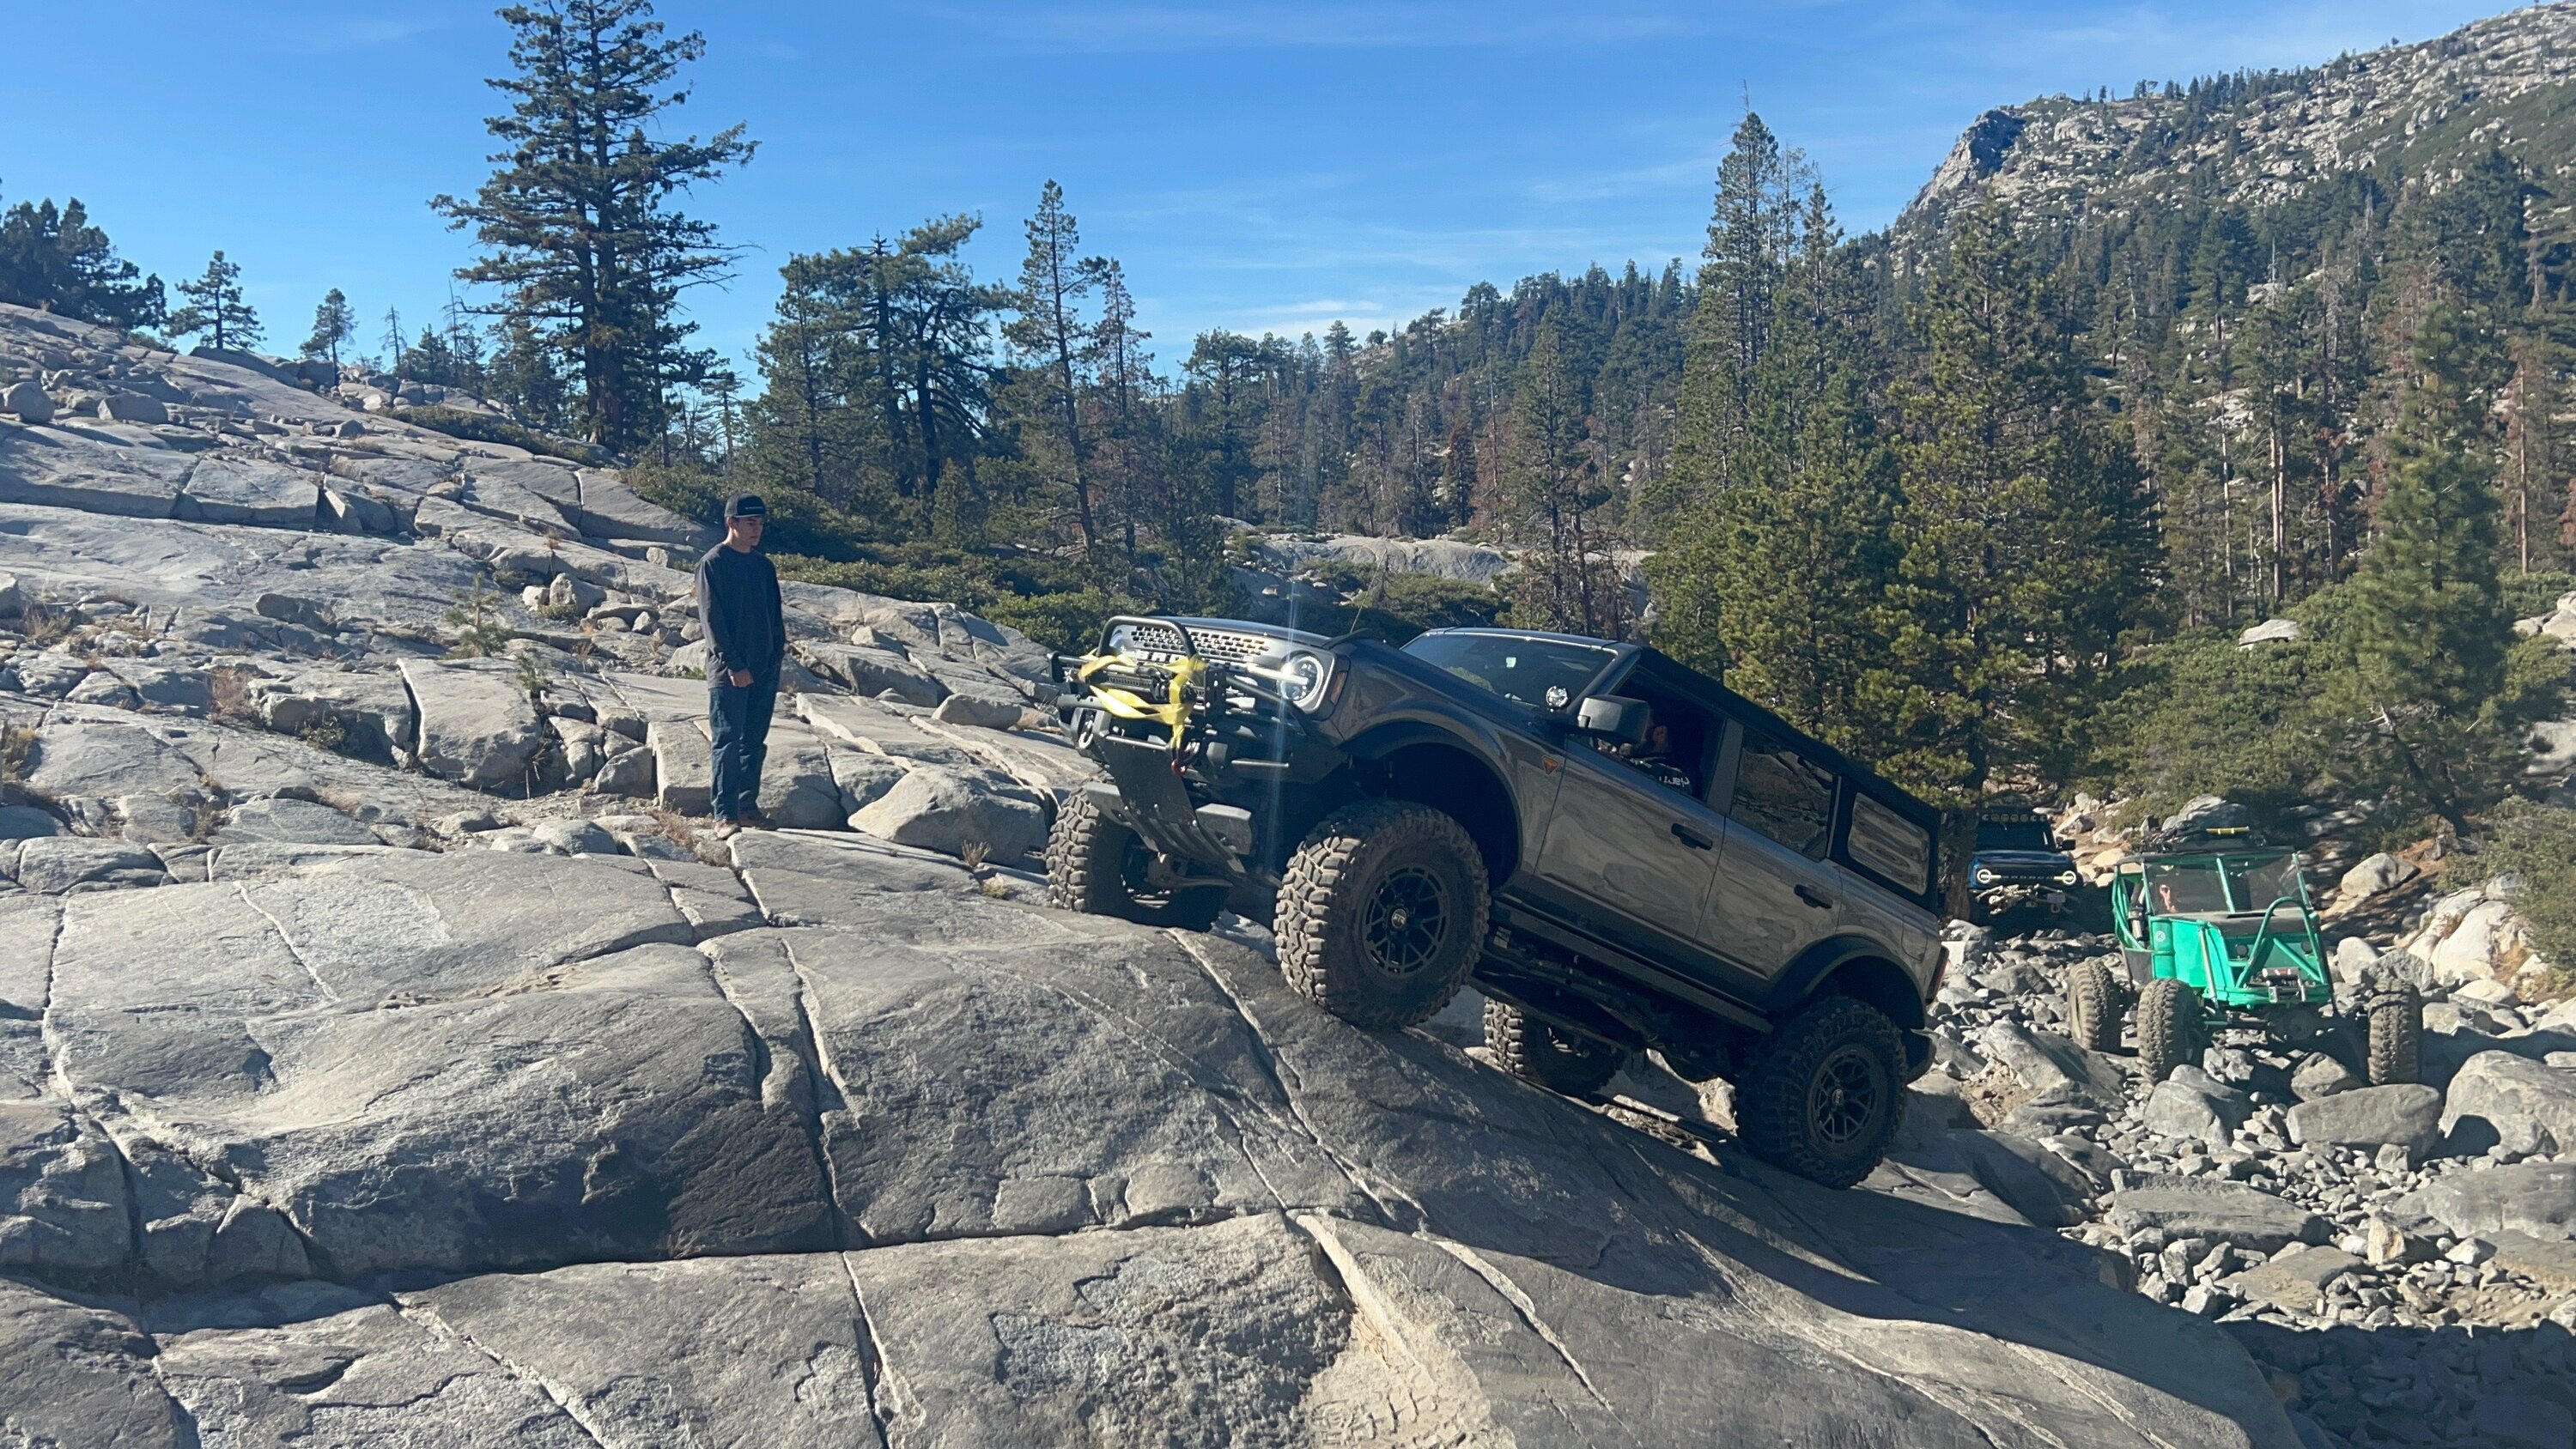 Ford Bronco Group of Broncos on Rubicon Trail Loon Lake to Little Sluice 2893DF8A-1664-4E0E-93C4-7C8347DDAF26